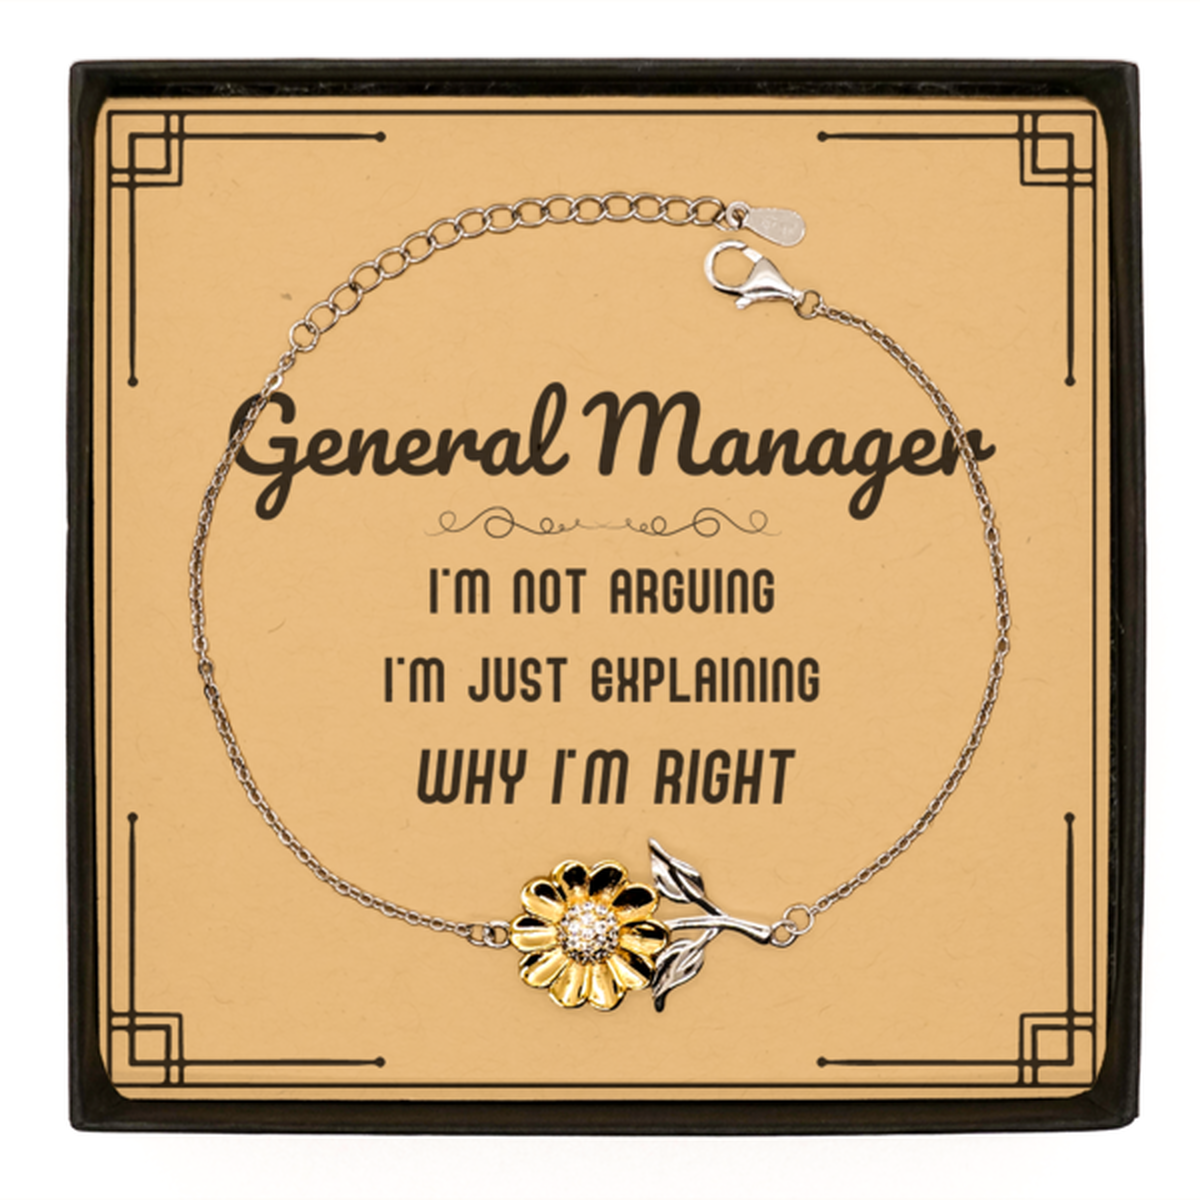 General Manager I'm not Arguing. I'm Just Explaining Why I'm RIGHT Sunflower Bracelet, Funny Saying Quote General Manager Gifts For General Manager Message Card Graduation Birthday Christmas Gifts for Men Women Coworker